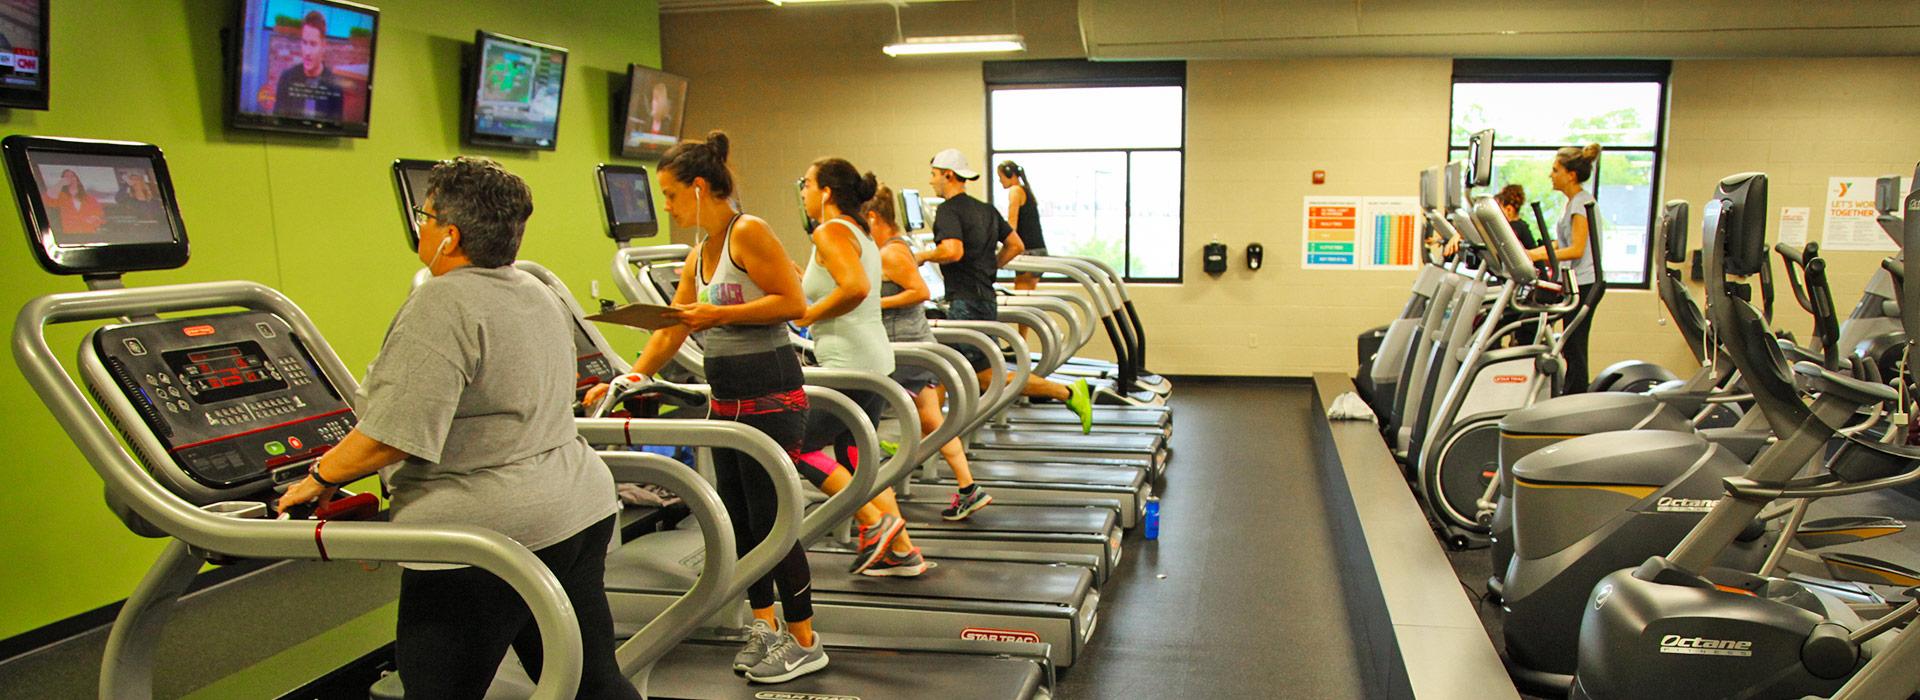 Members using cardio equipment, including treadmills, ellipticals, bikes and stair climbers in the wellness center at the YMCA on Granby